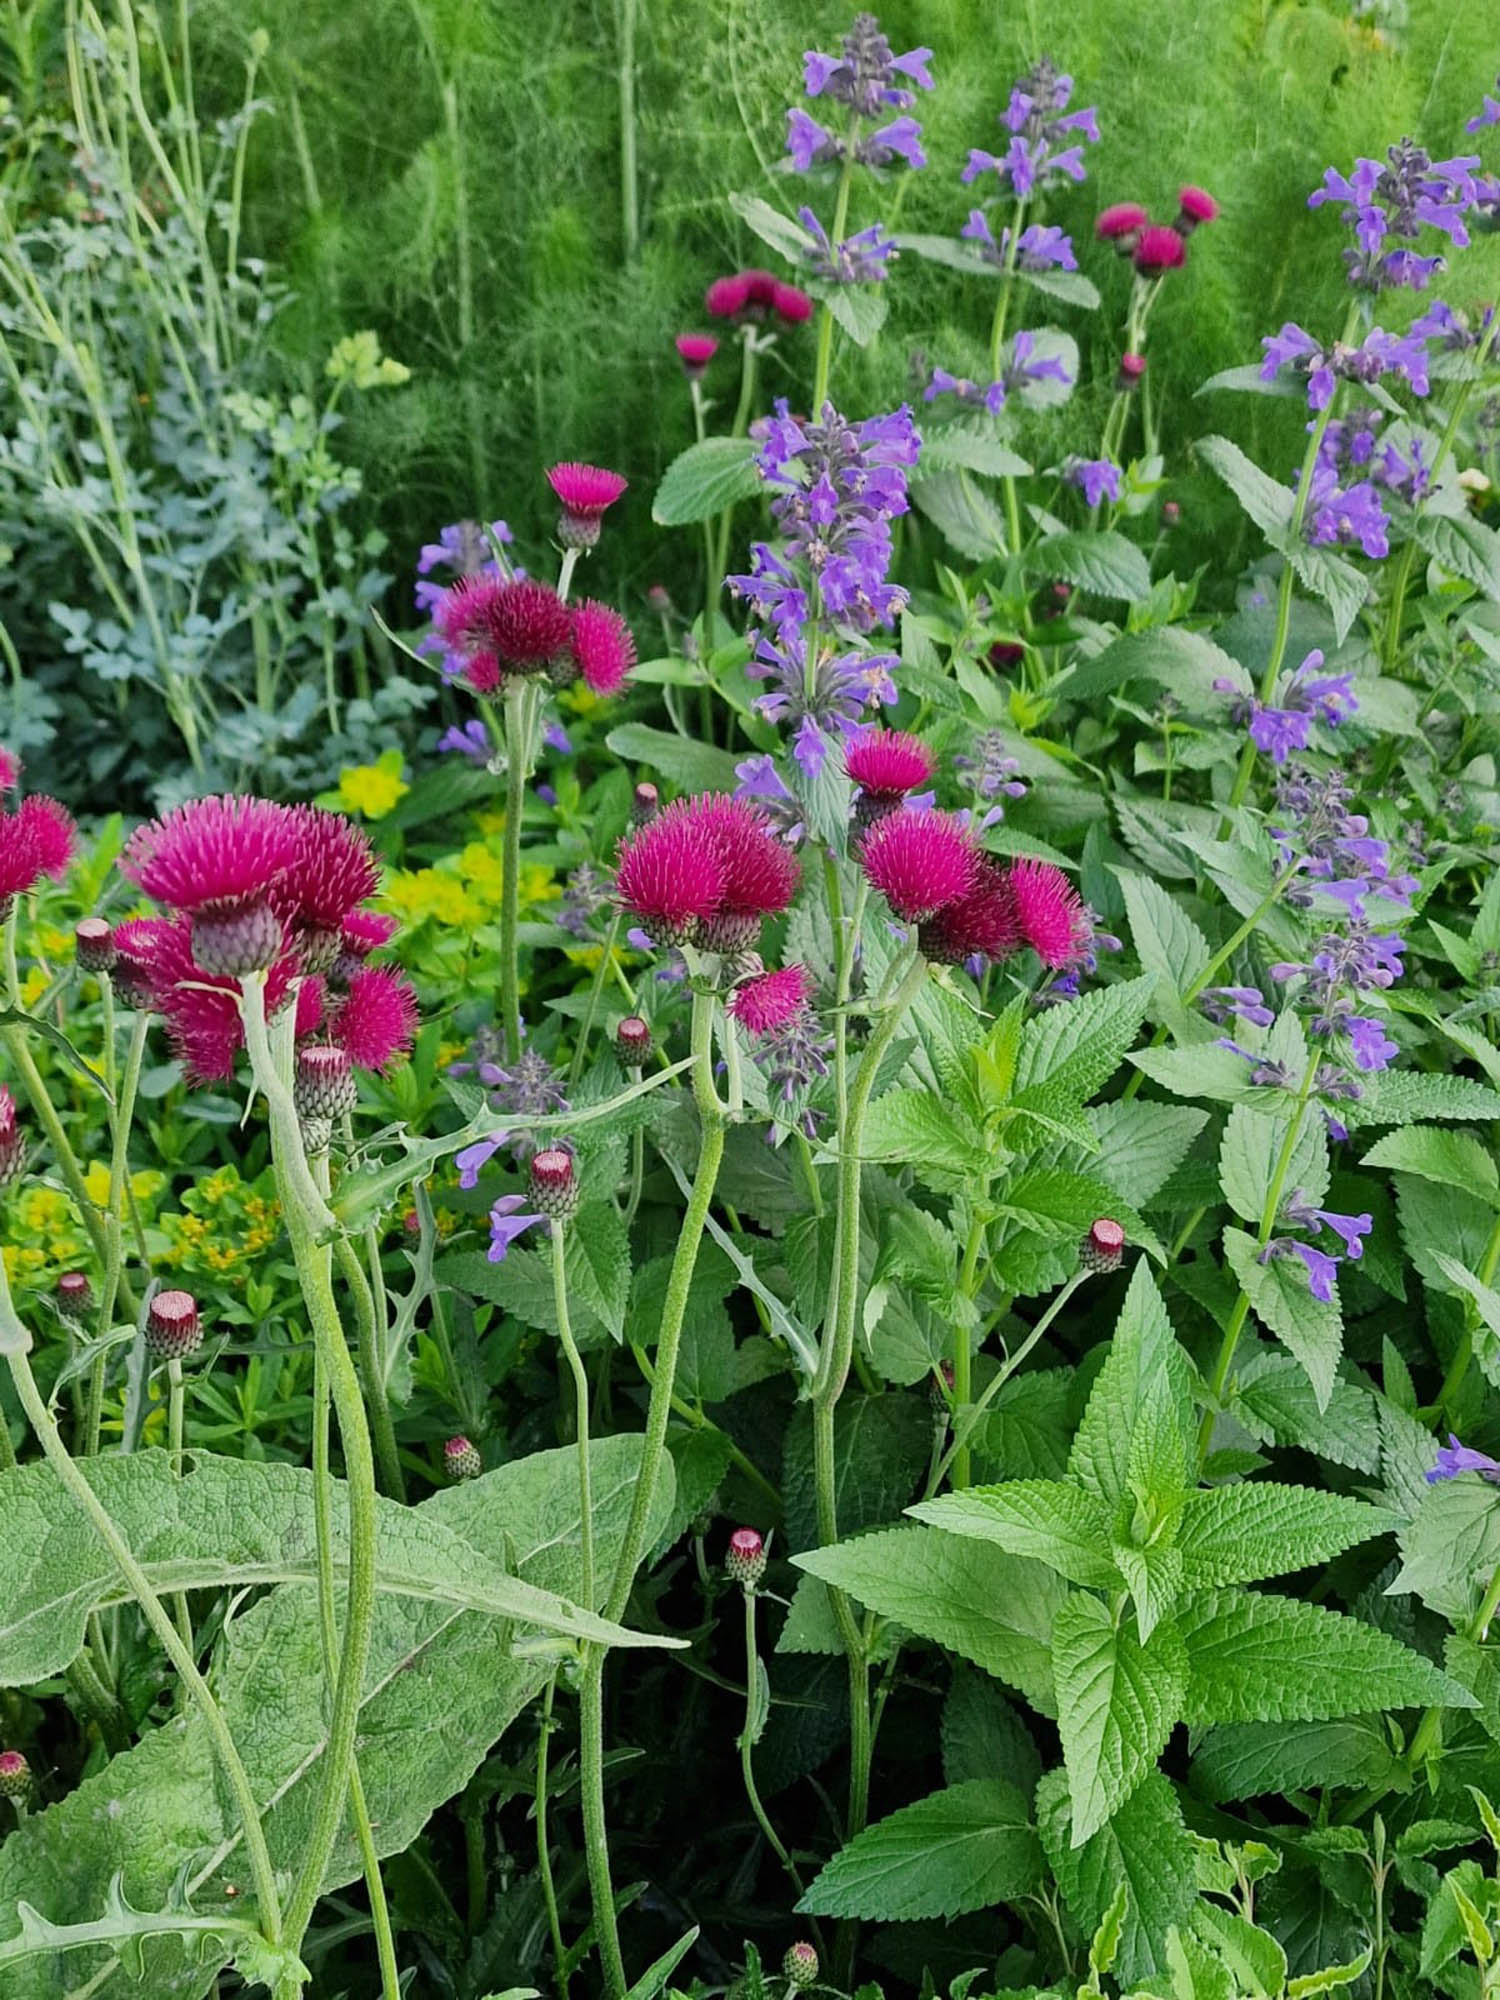 Beautiful wild flowers, herbs and pollinators growing in abundance in the RNLI charity garden at Chelsea flower show 2022